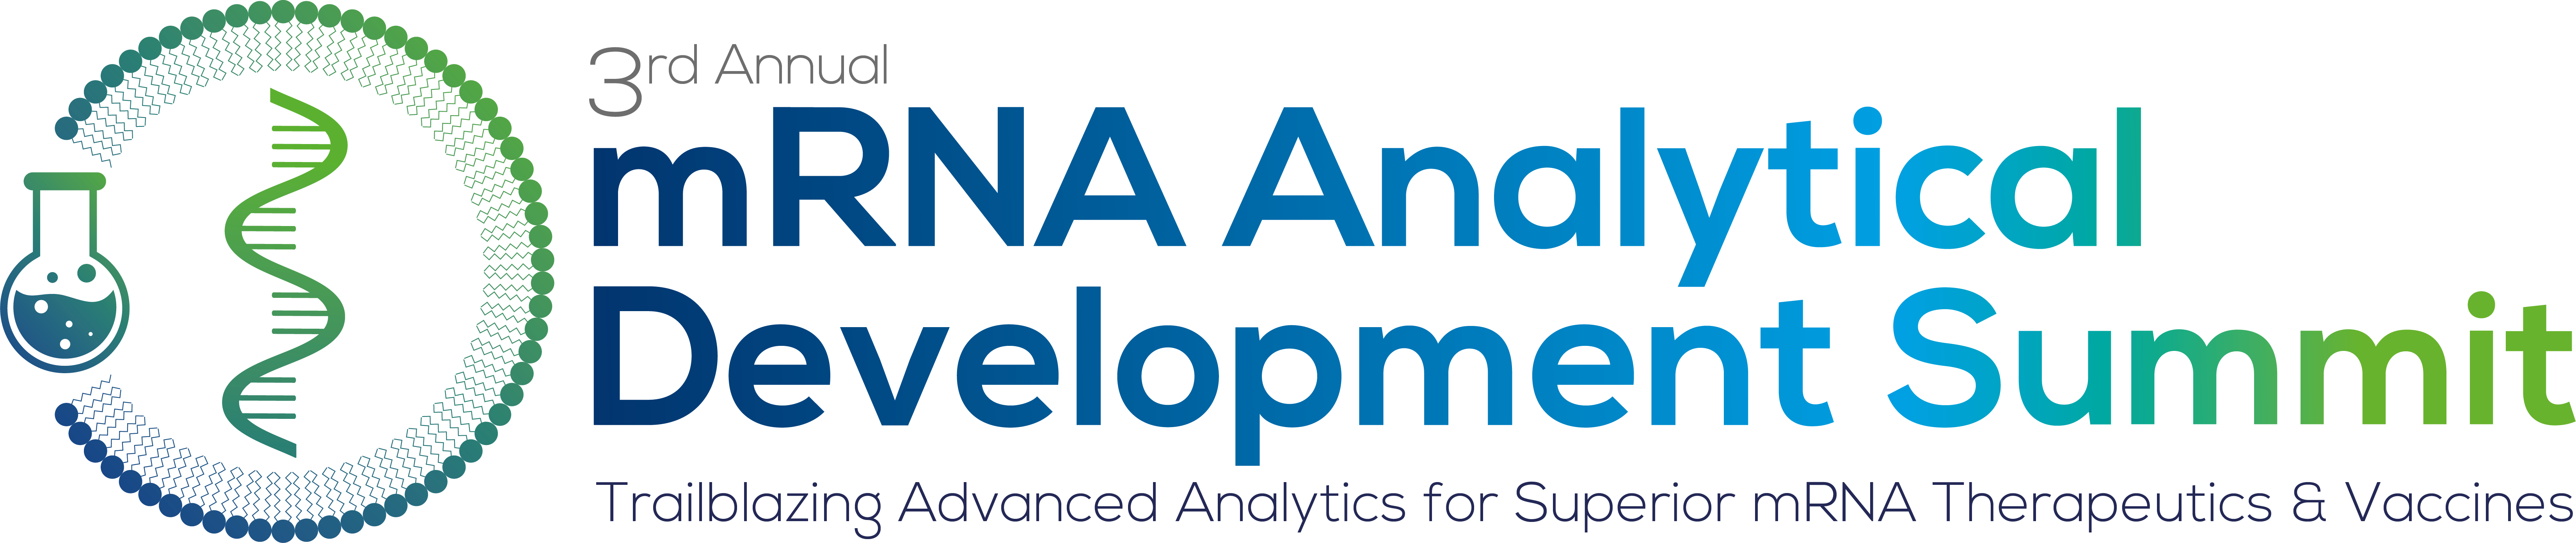 3rd mRNA Analytical Development Summit logo FINAL With Tag